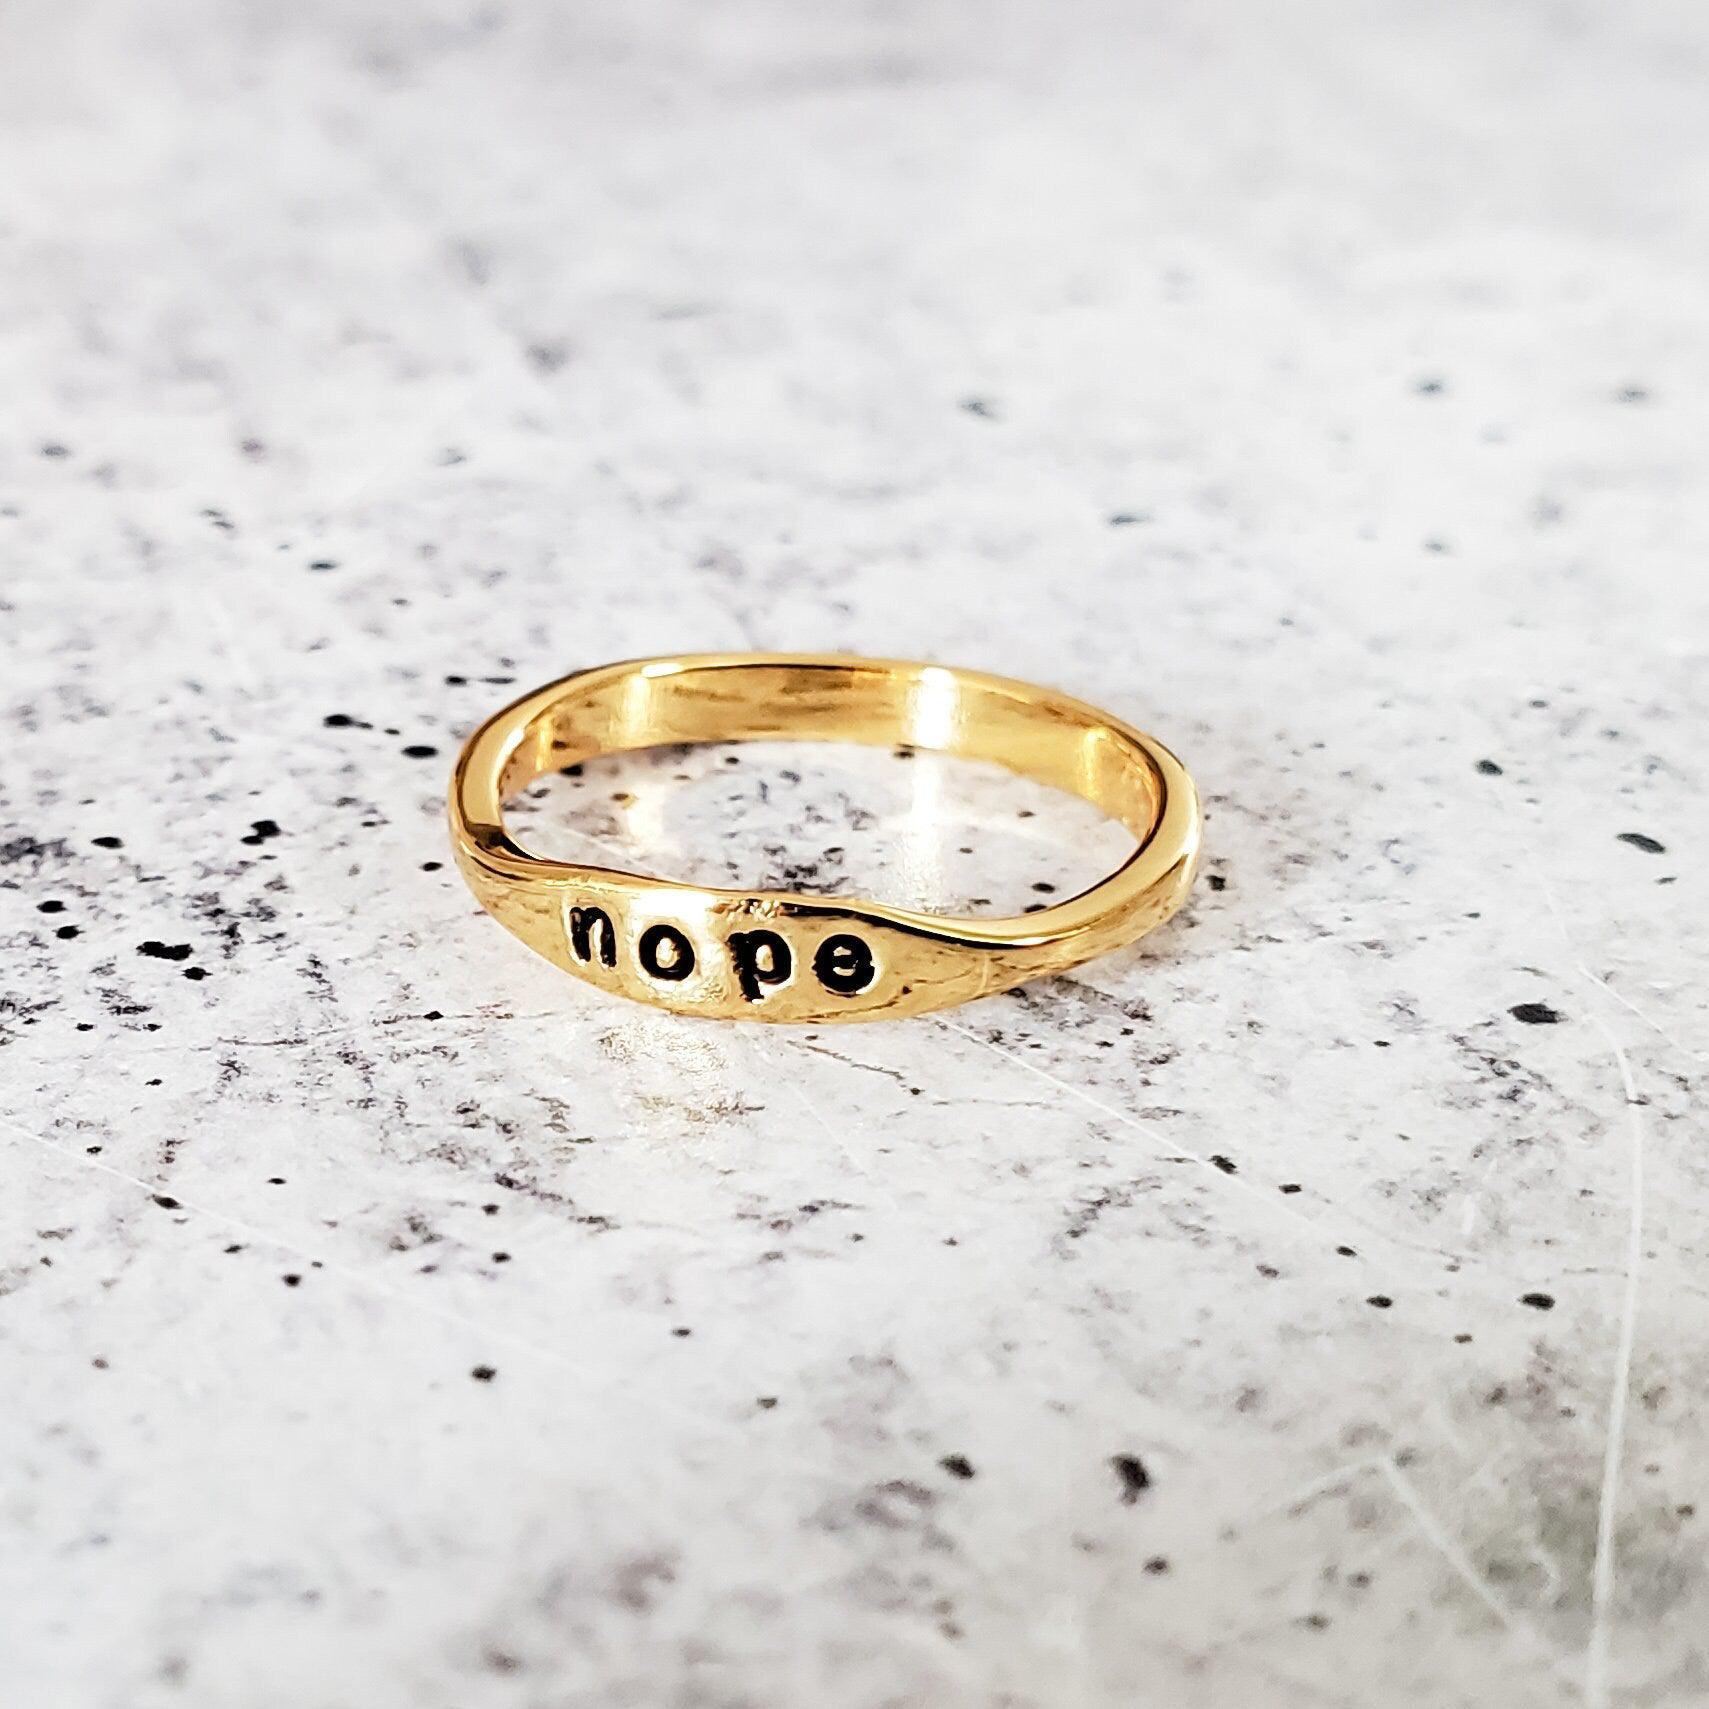 NOPE Dainty Ring - Minimalist Jewelry for Her - Stacking Ring for Single Friend - Funny Feminist Accessory - Holiday Gift for Best friends